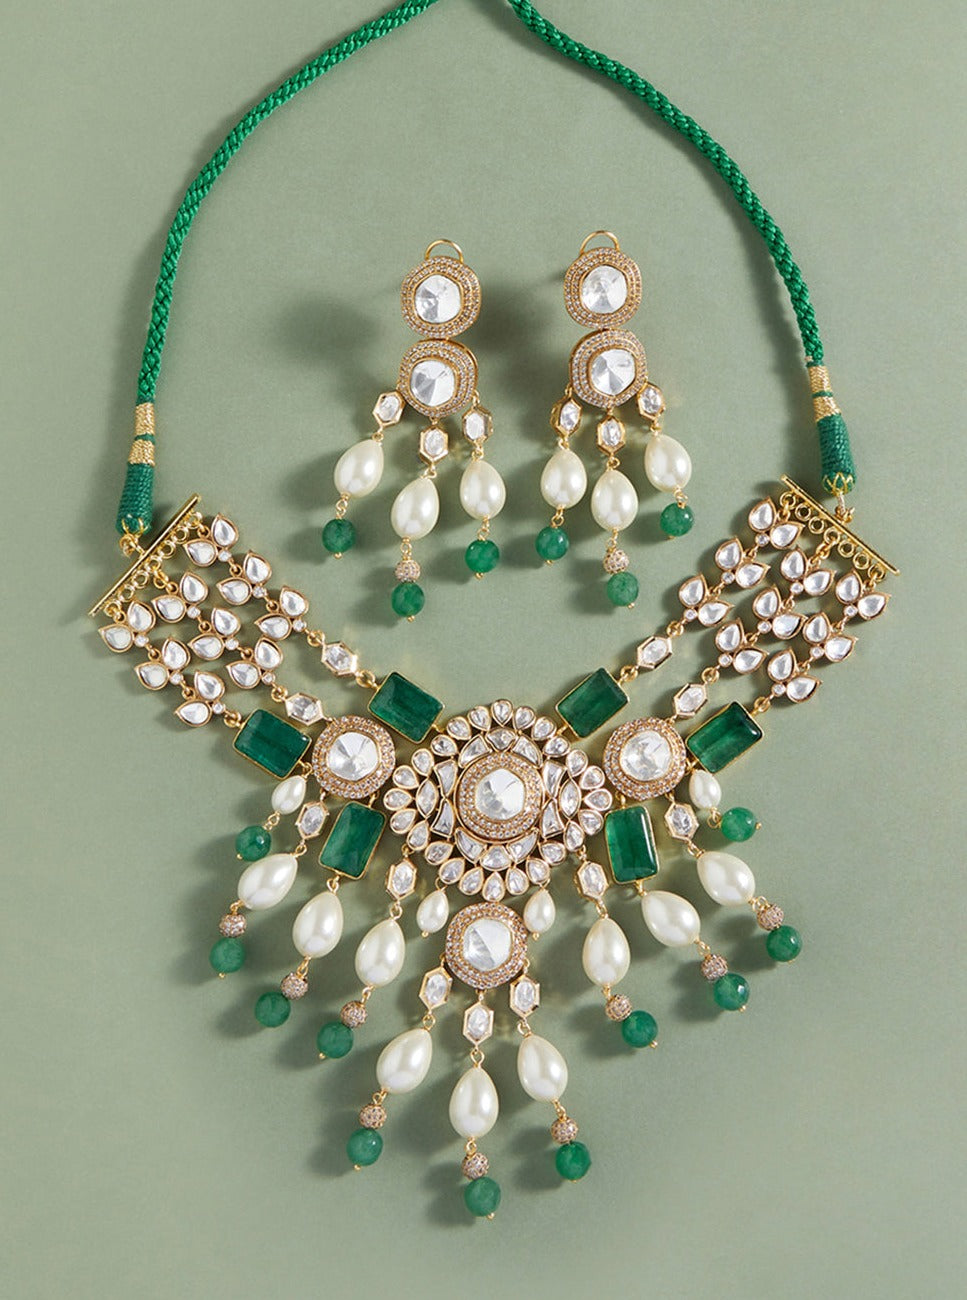 Amama,Bridal Necklace Set With Green Jades & Pearls